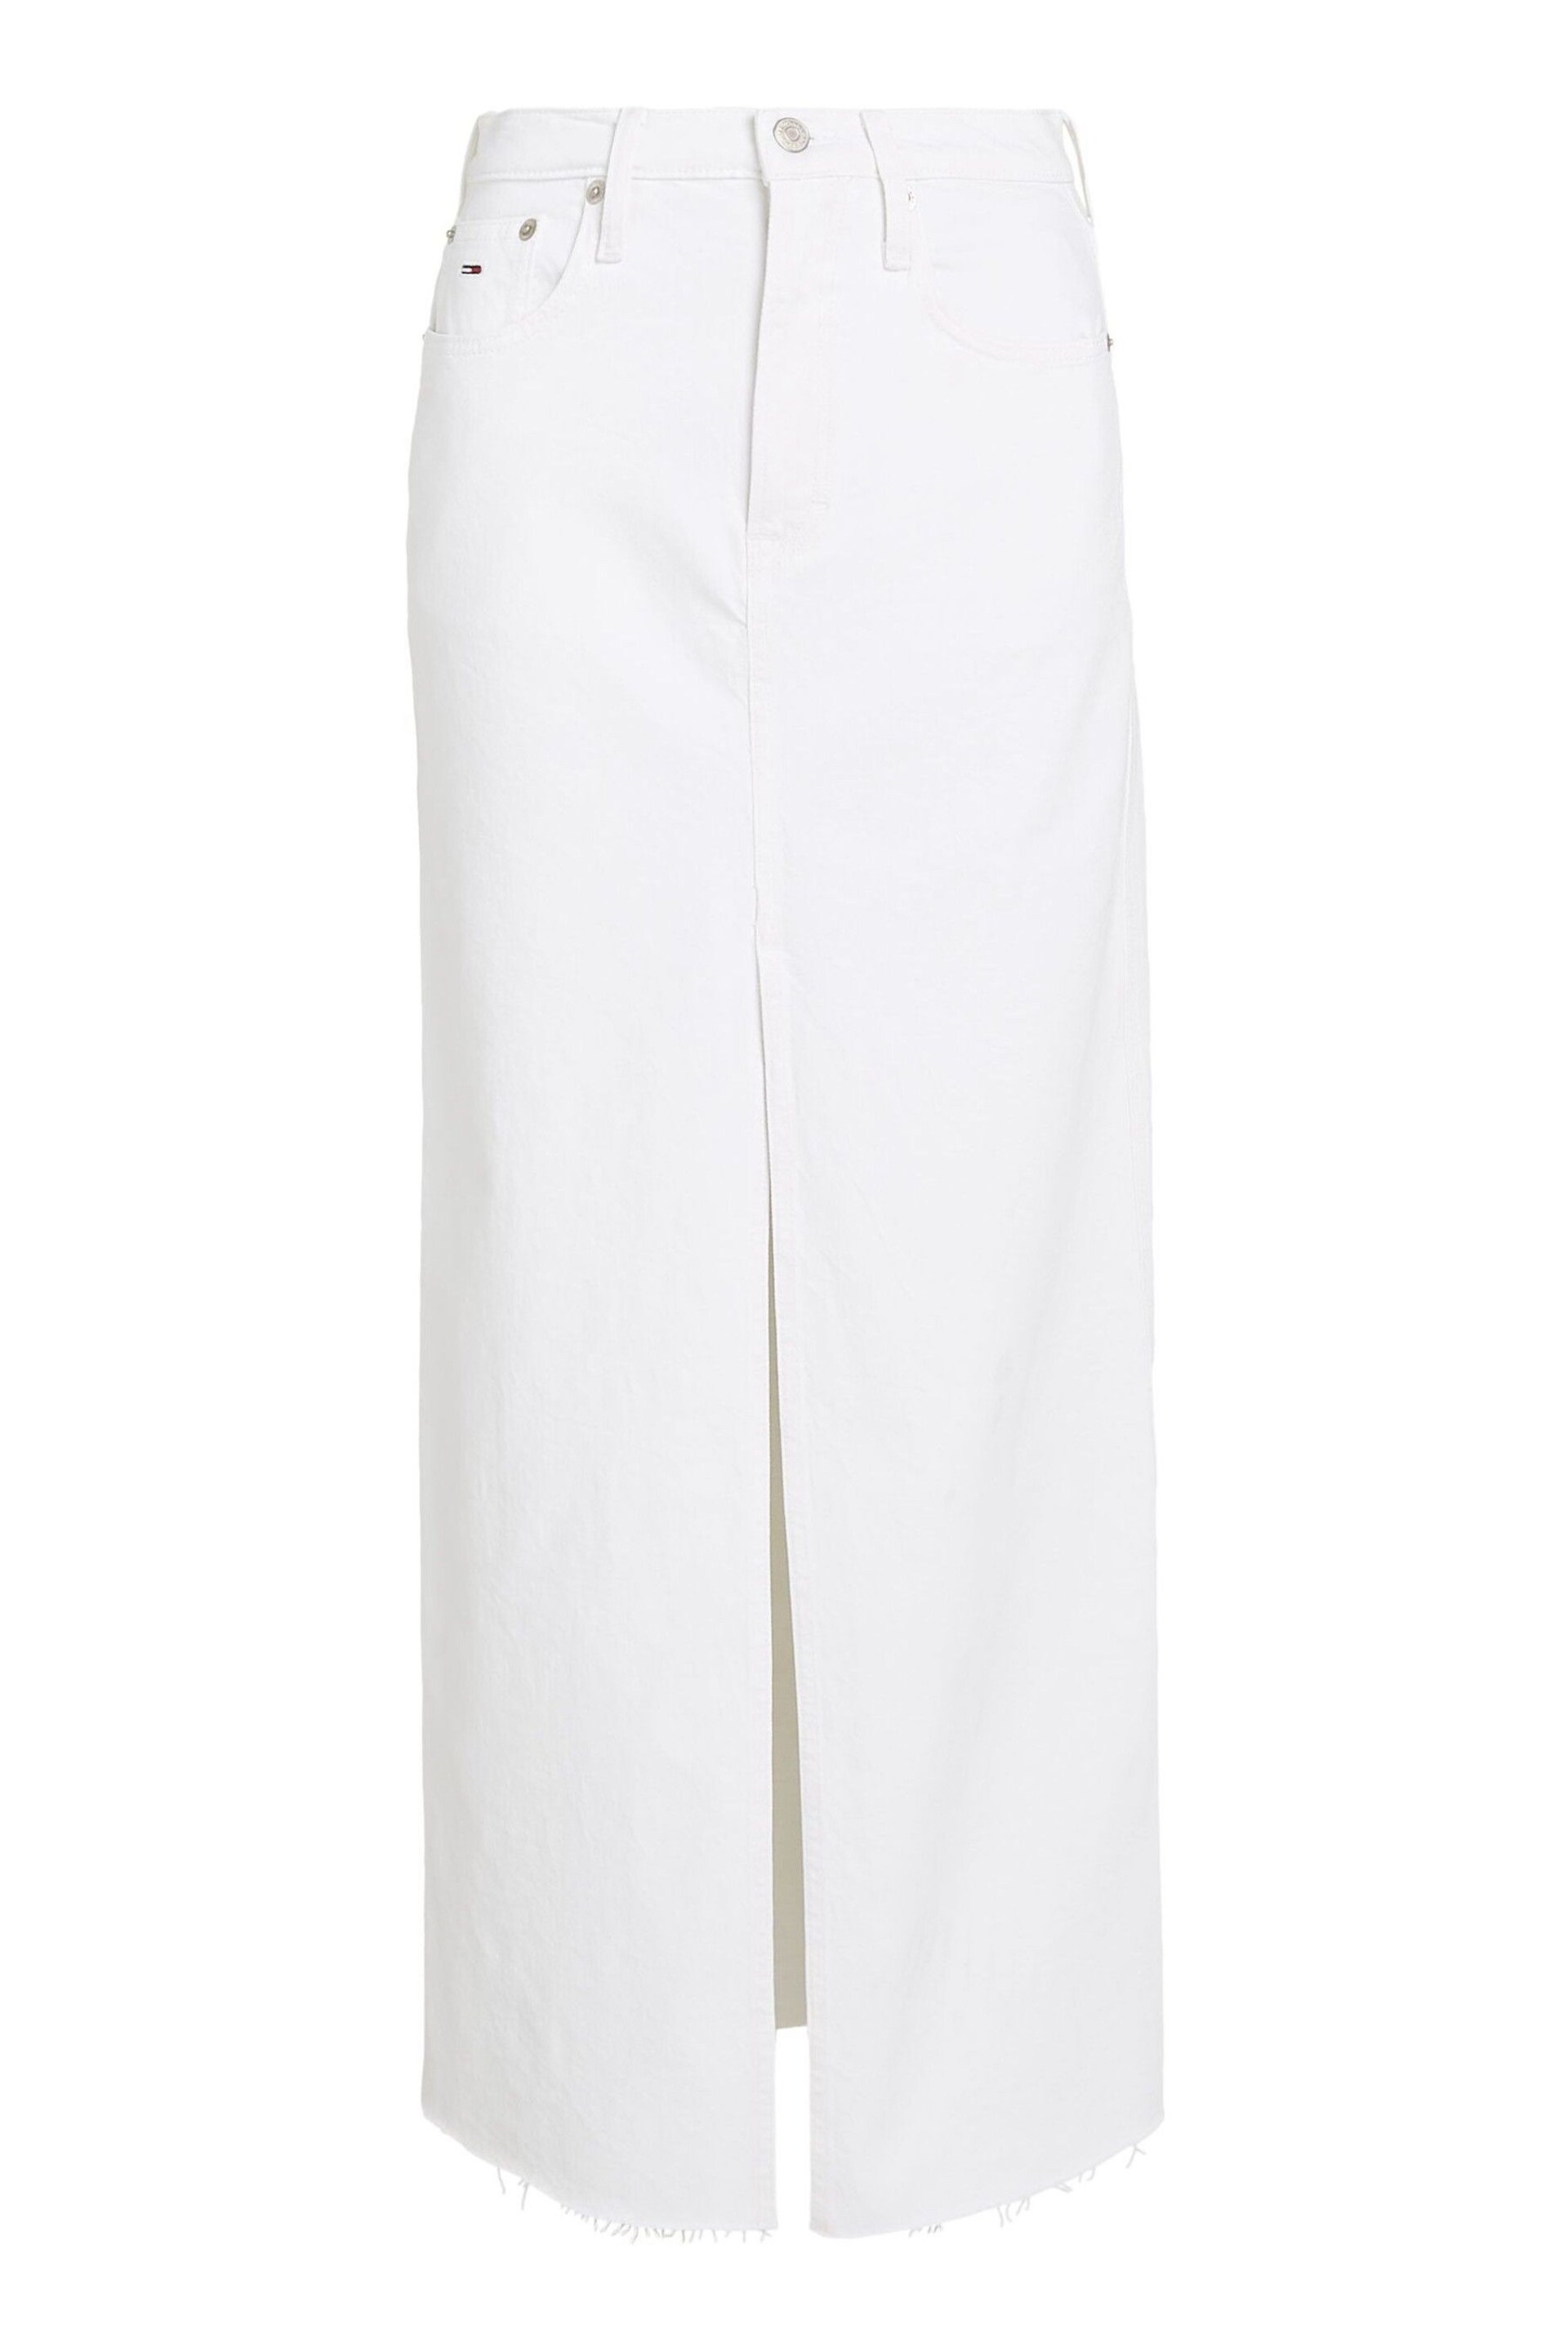 Tommy Jeans Claire High Maxi White Skirt - Image 4 of 6